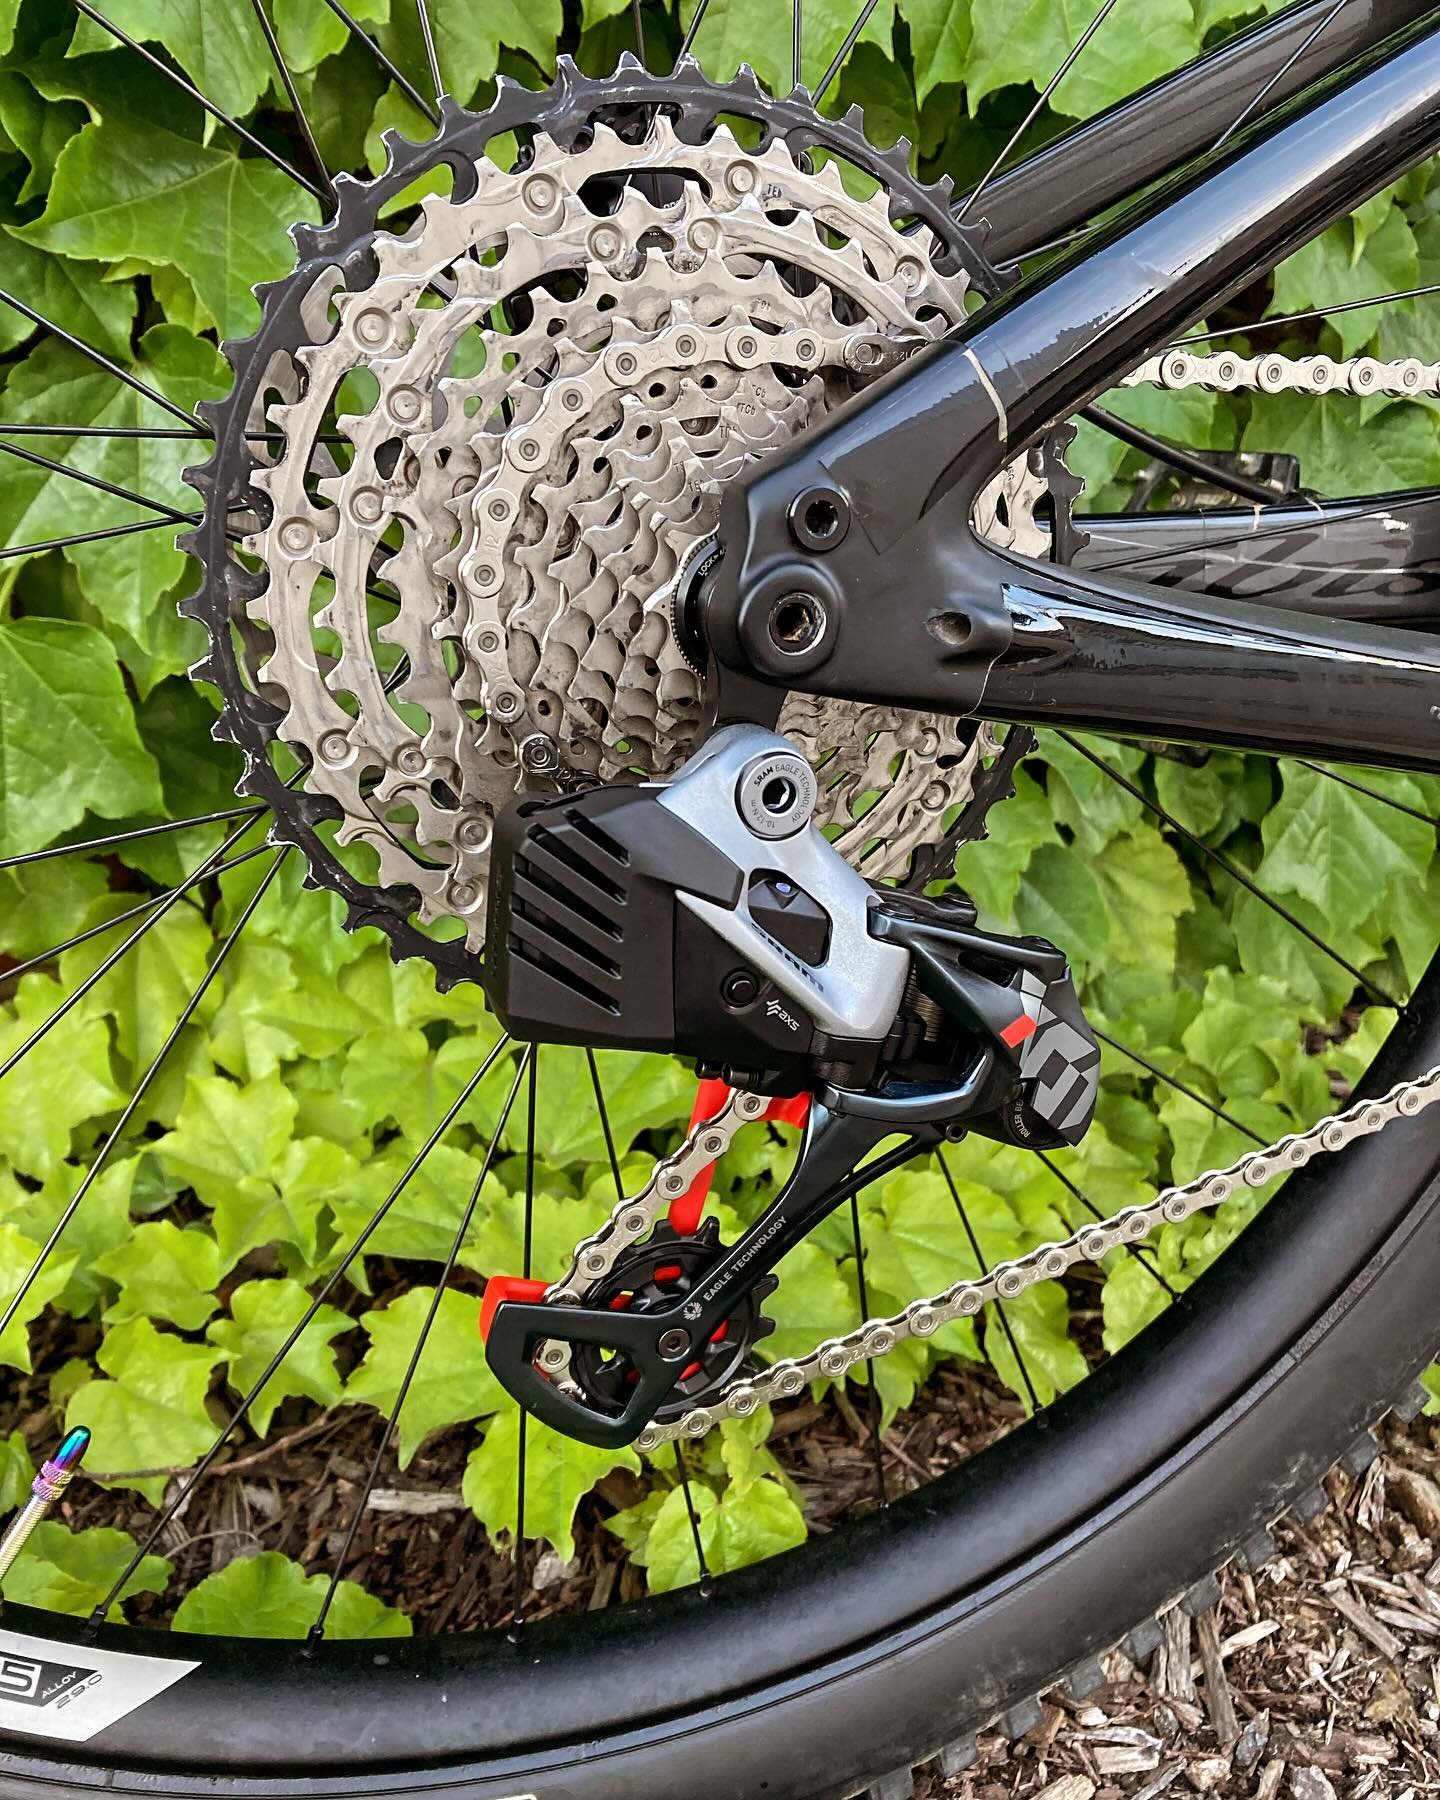 SRAM AXS Upgrades are always worth the investment. Seem-less shifting - stronger pulley hardware - transmission cranks for better rigidity under load - no more hassling with shift cables or tension points - customized shifting patterns and analysis o